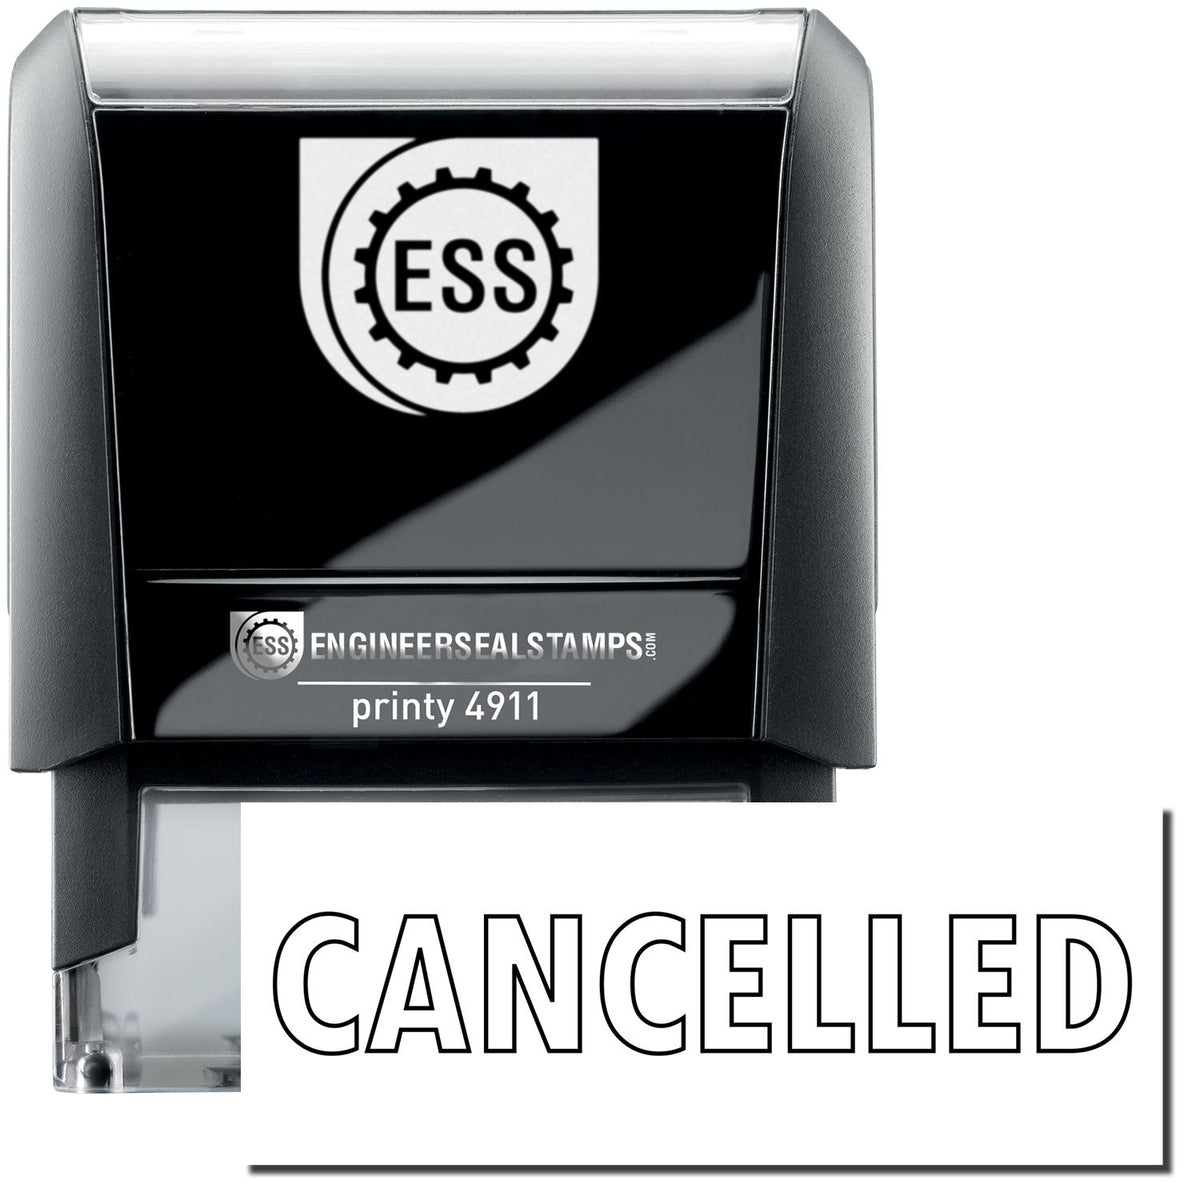 A self-inking stamp with a stamped image showing how the text &quot;CANCELLED&quot; in an outline style is displayed after stamping.